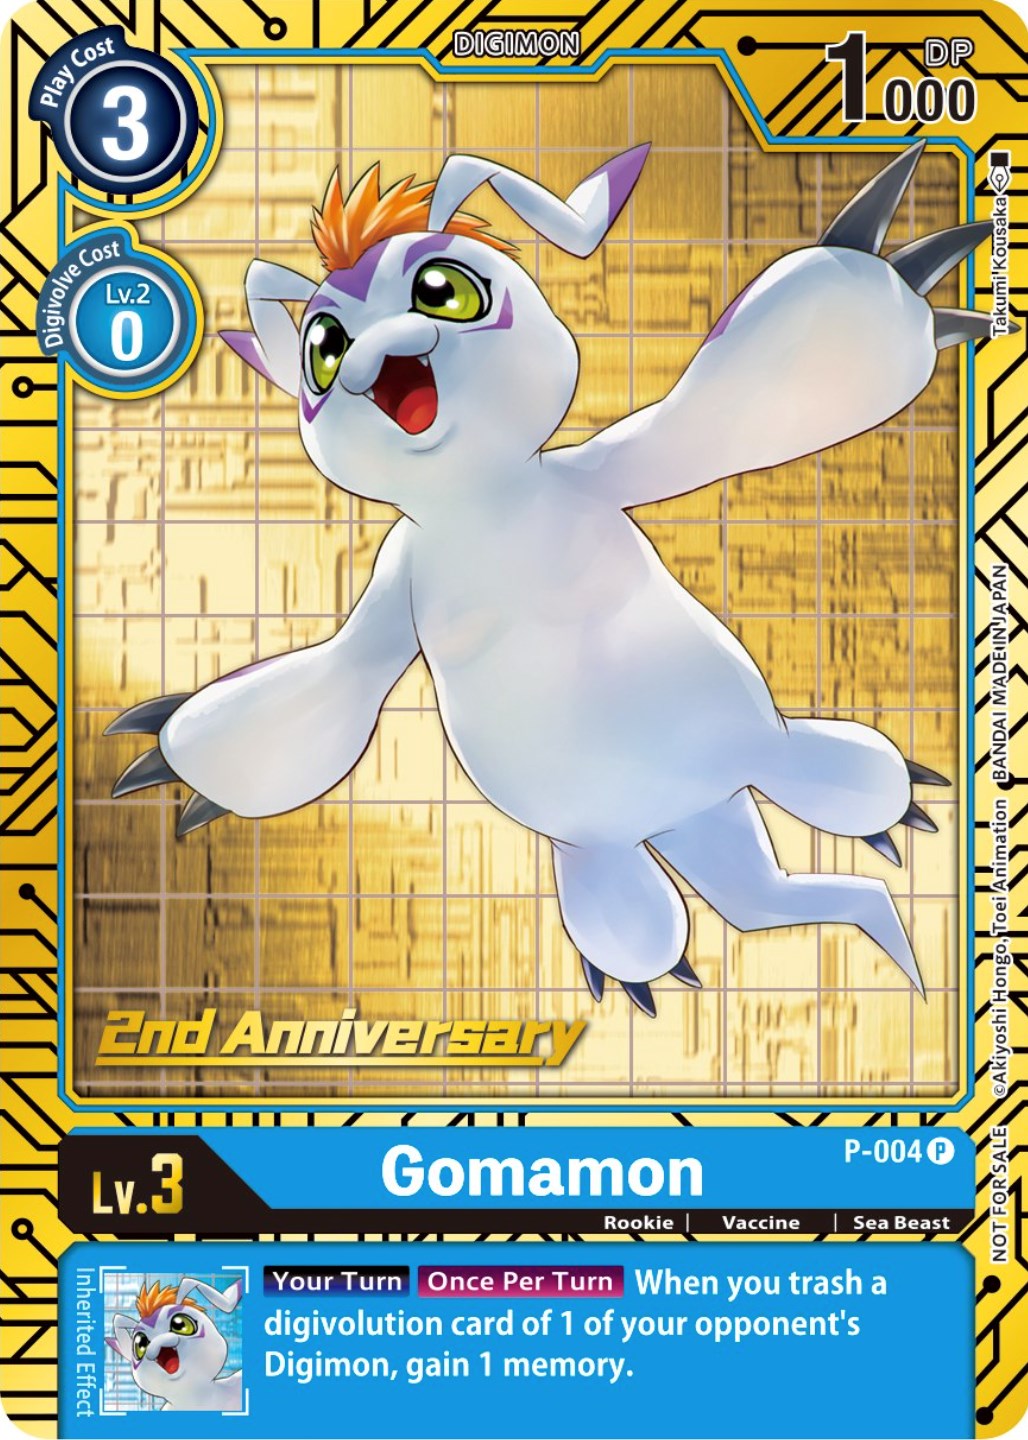 Gomamon [P-004] (2nd Anniversary Card Set) [Promotional Cards] | Mindsight Gaming